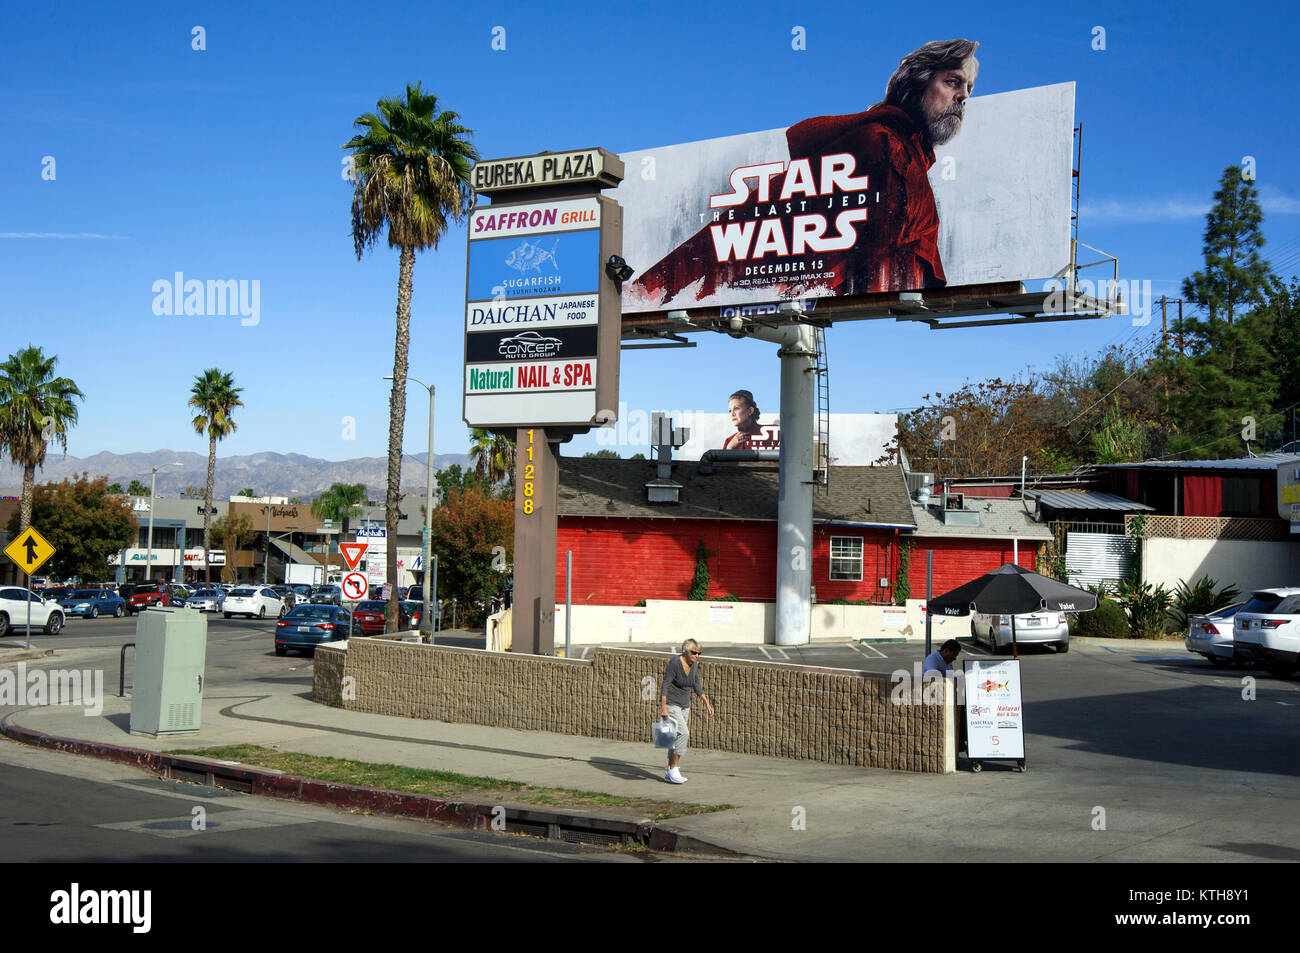 Billboards featuring Mark Hammil and Carrie Fisher for Star Wars The Last Jedi Movie in Los Angeles, CA Stock Photo